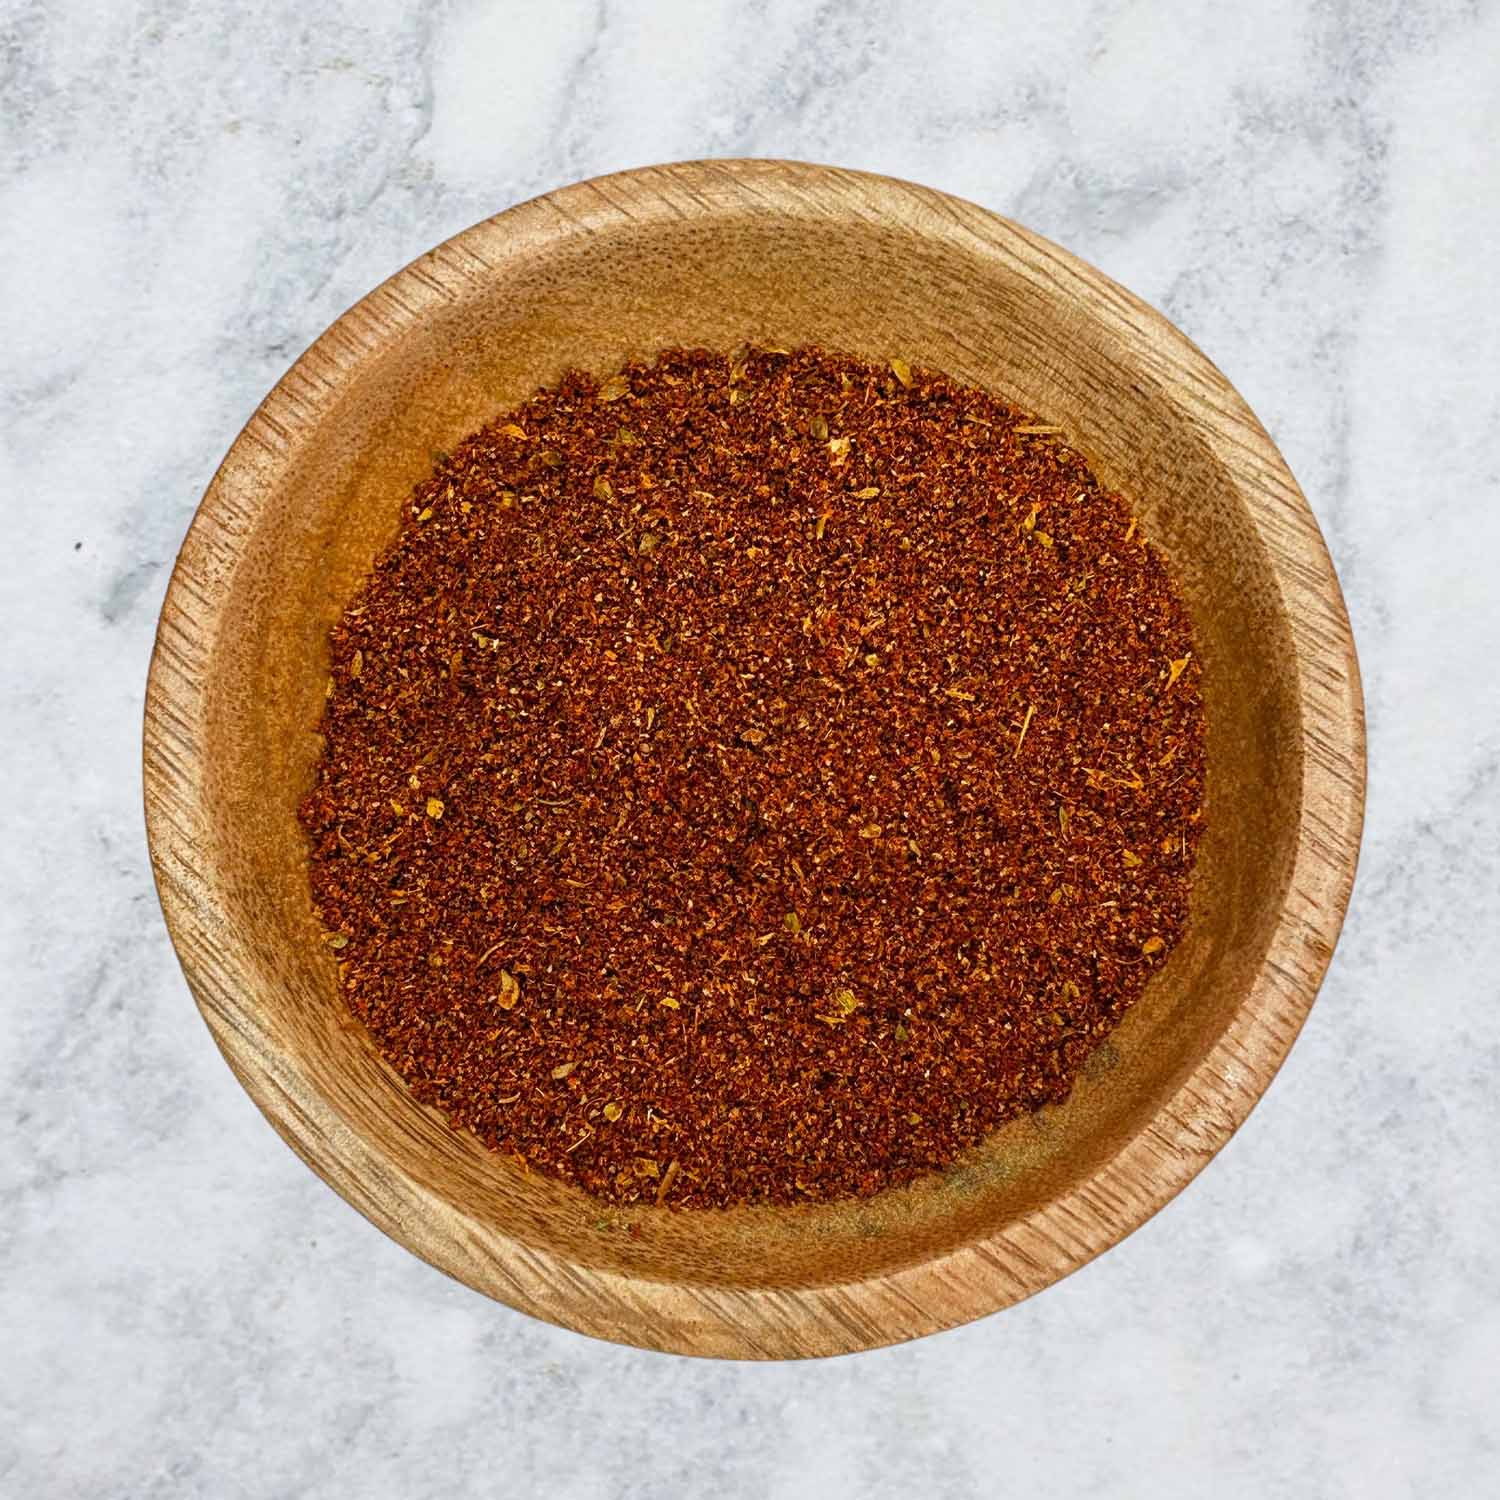 Sorella Spice Fiesta Blend is an Mexican-inspired blend that can be used to season Spanish style food